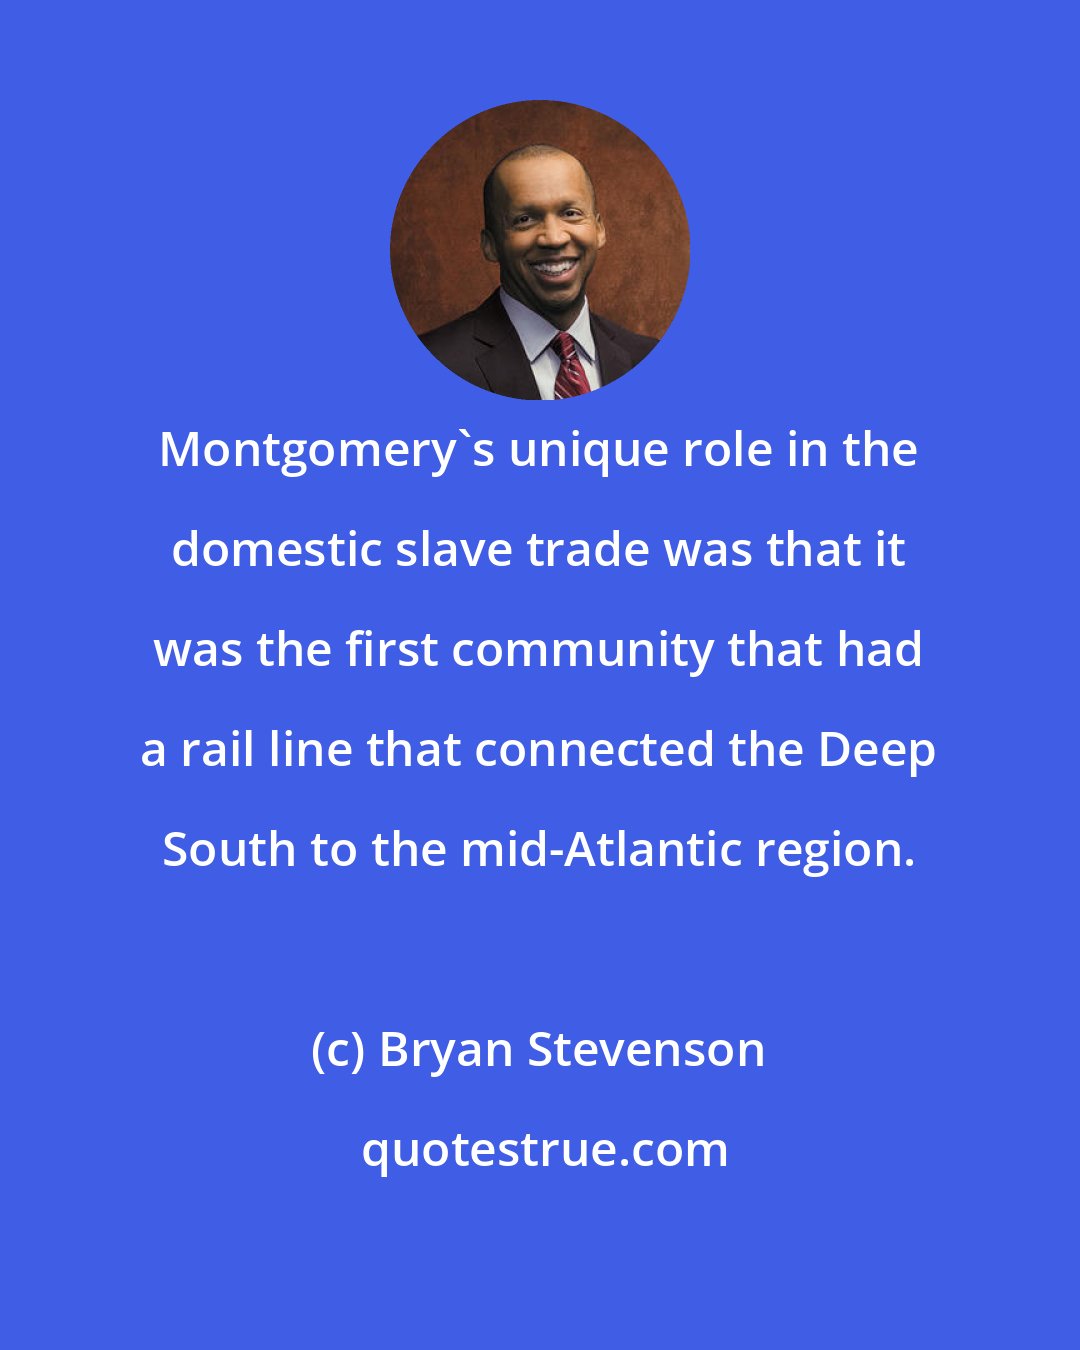 Bryan Stevenson: Montgomery's unique role in the domestic slave trade was that it was the first community that had a rail line that connected the Deep South to the mid-Atlantic region.